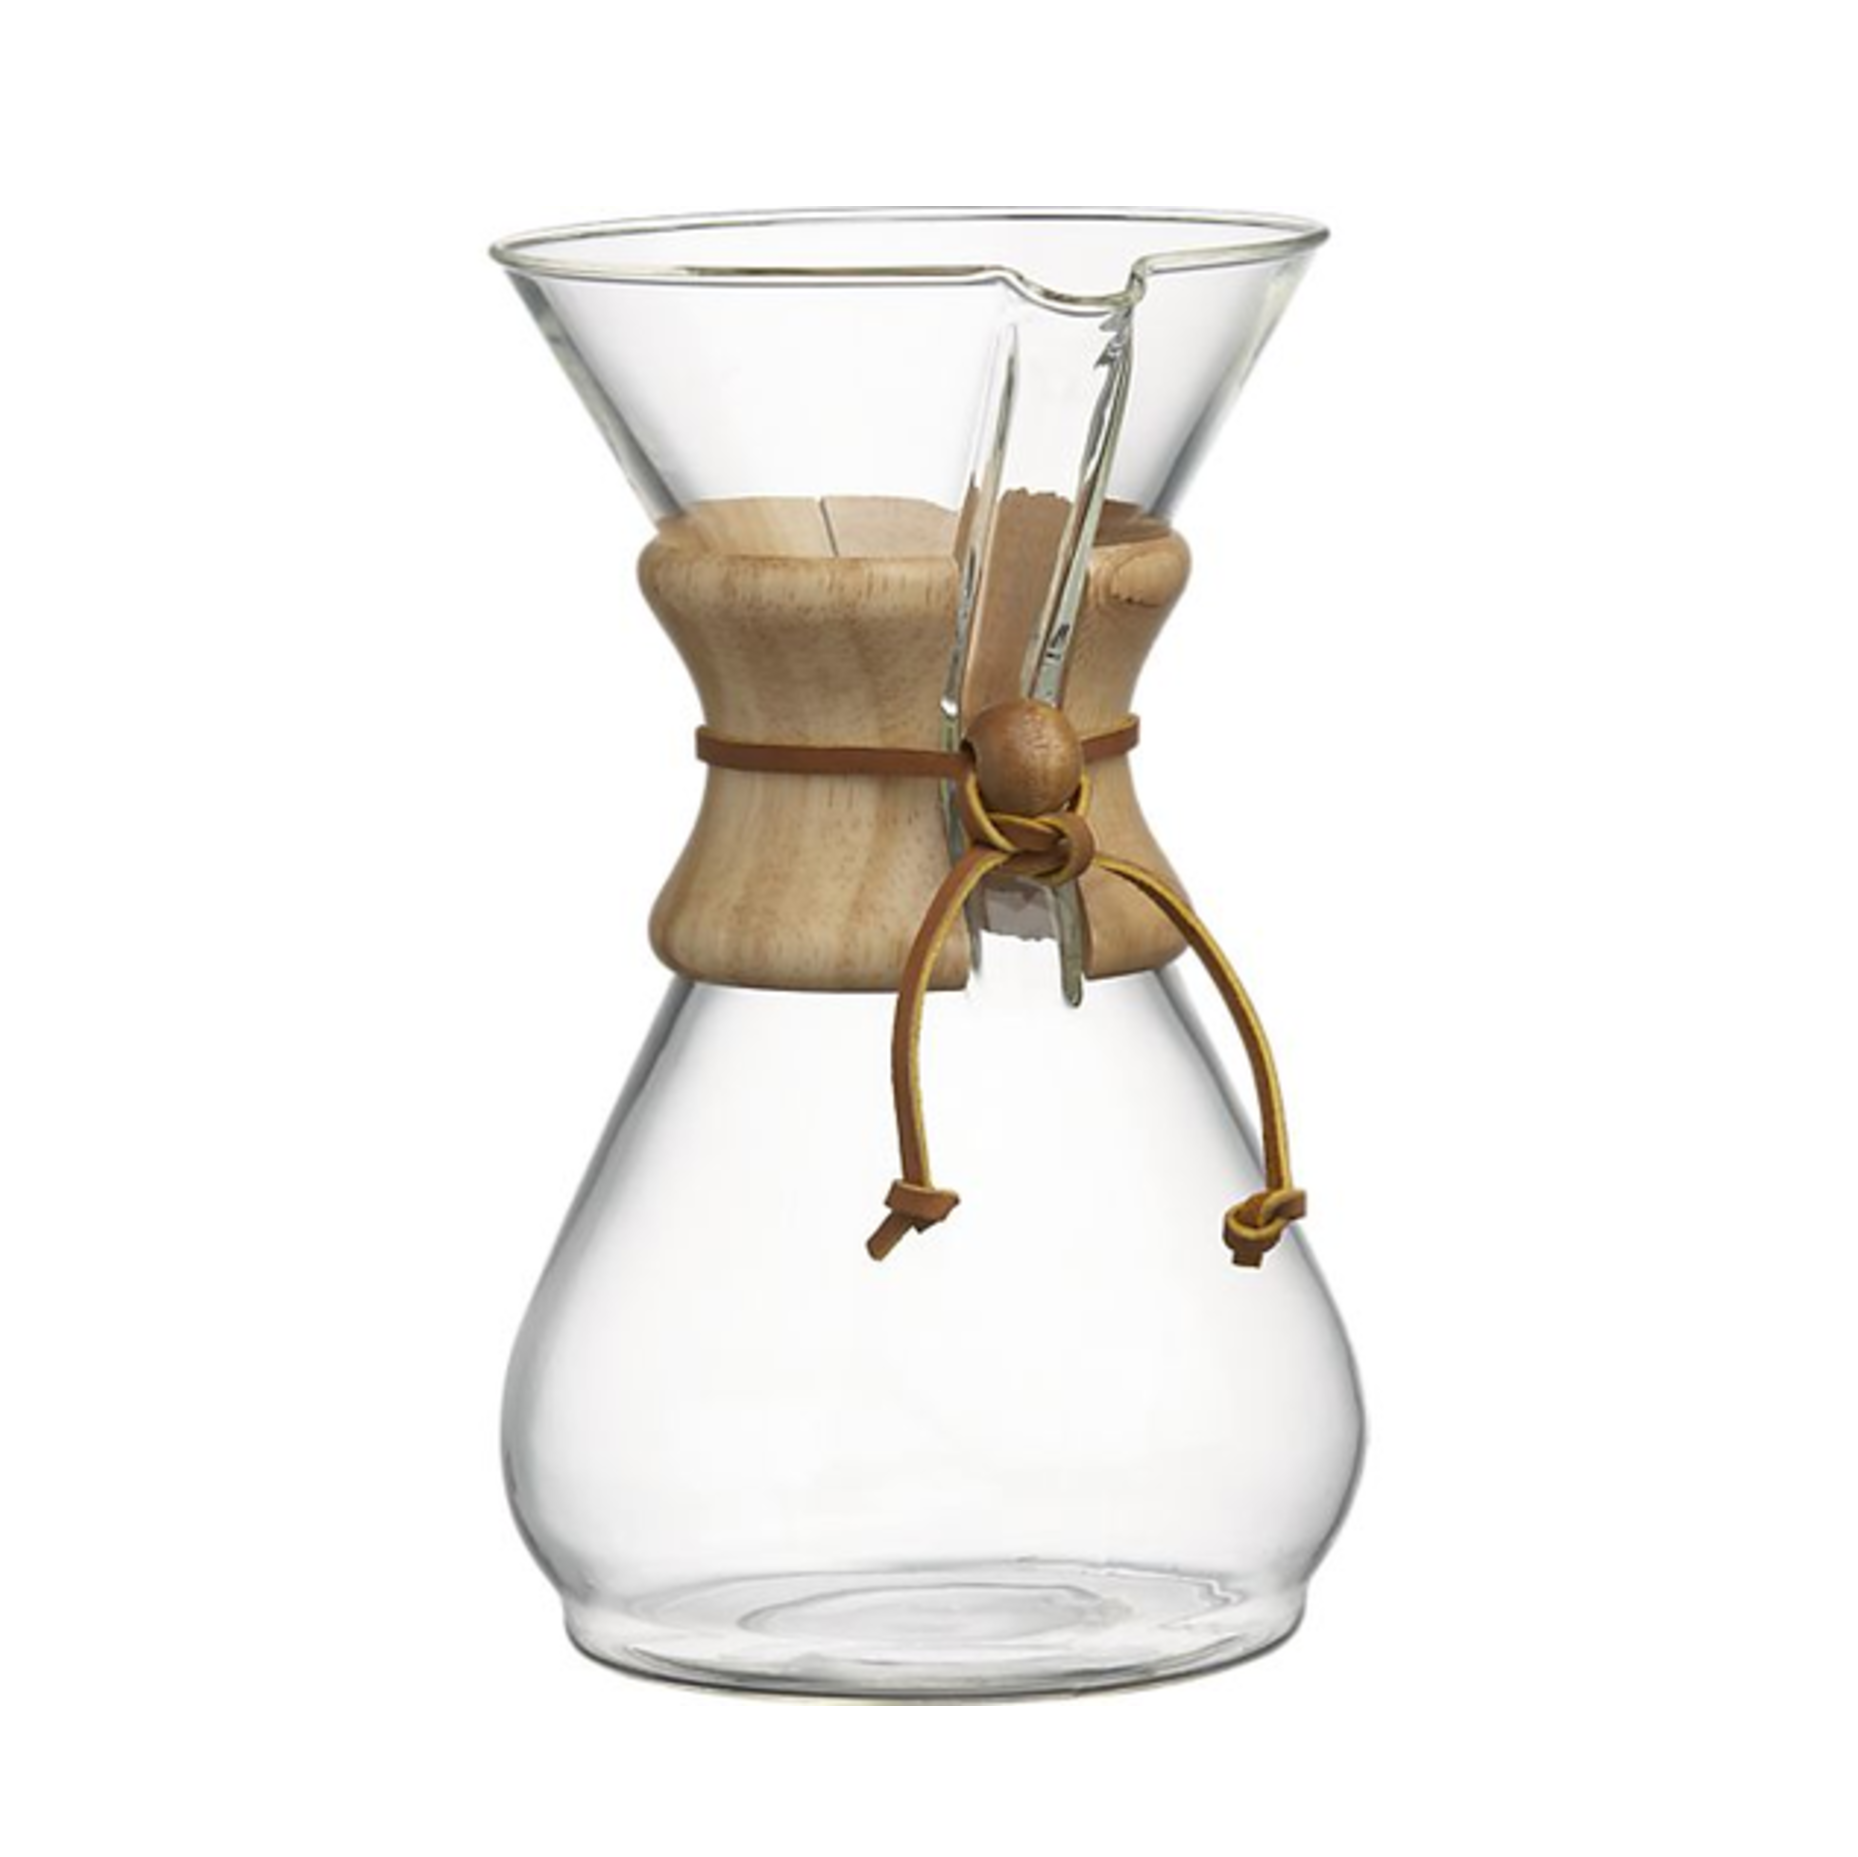 8 cup Chemex - Whisk